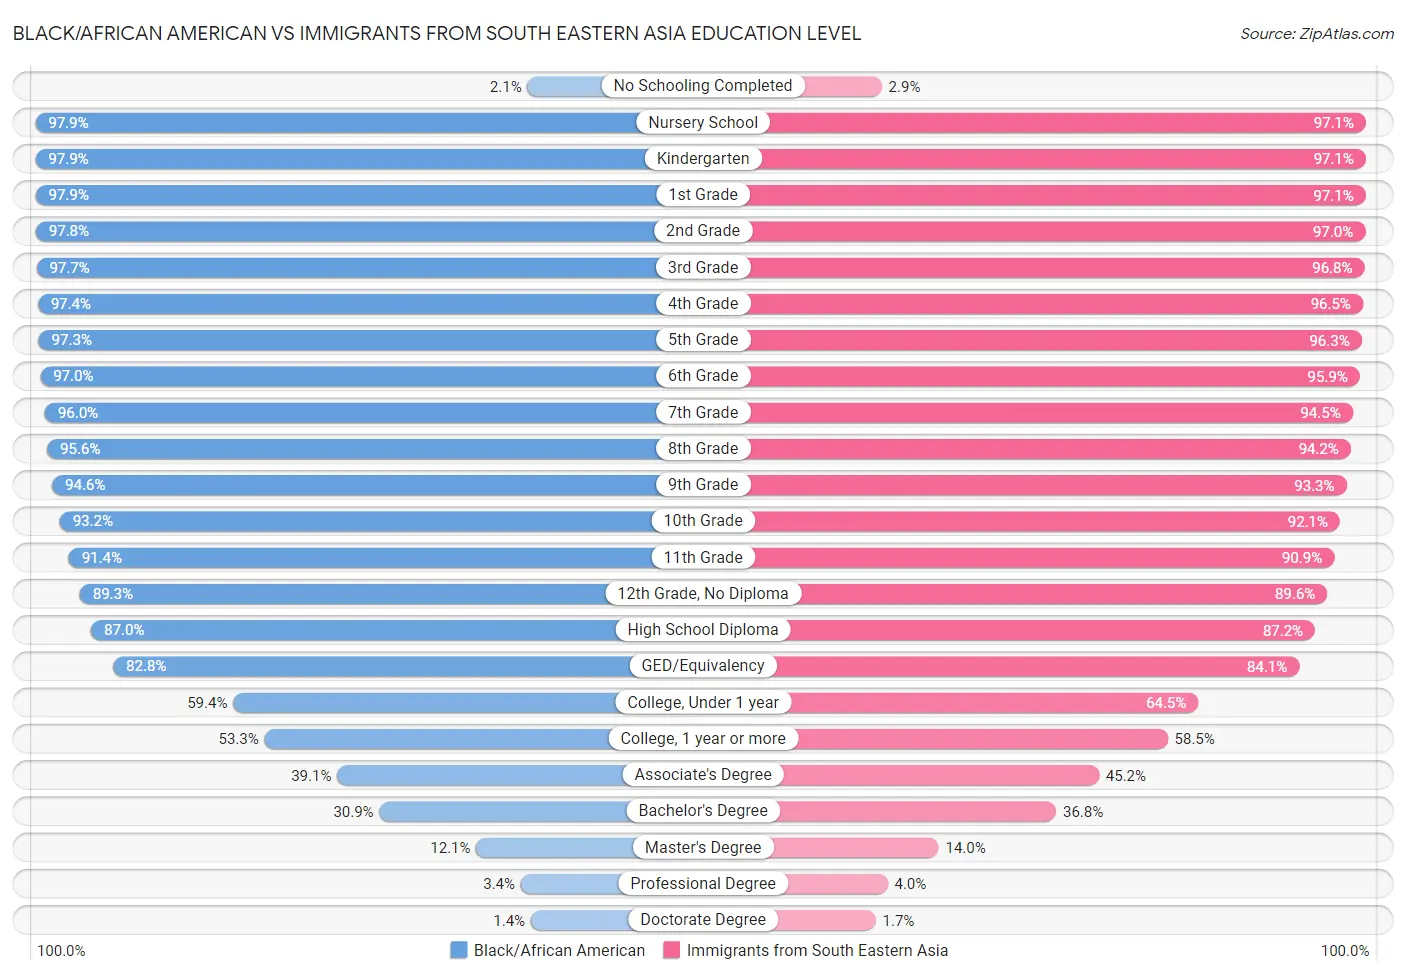 Black/African American vs Immigrants from South Eastern Asia Education Level